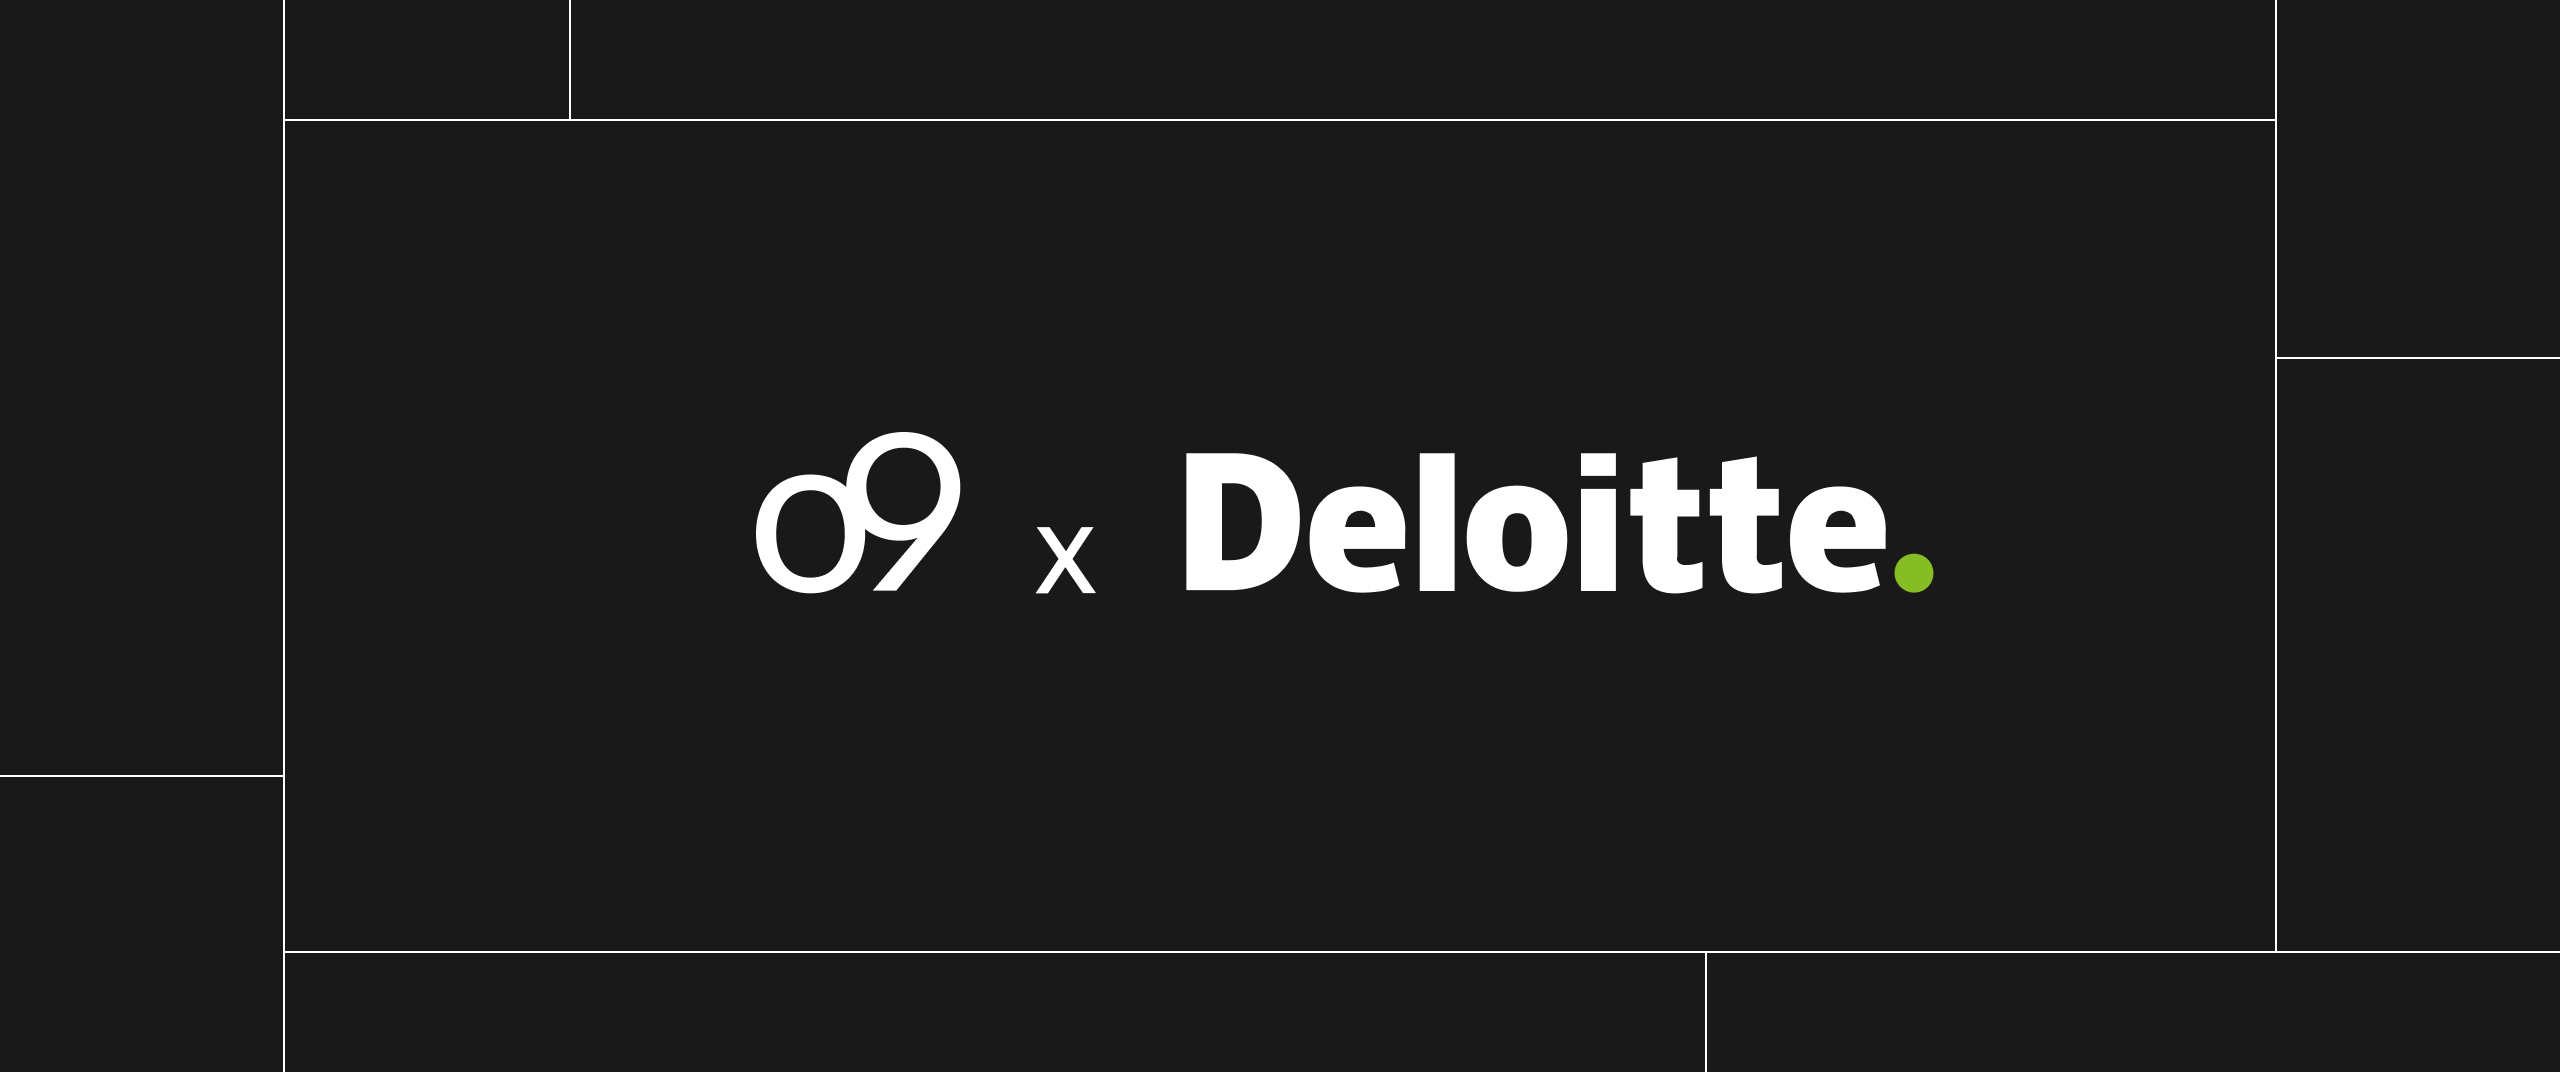 o9 Solutions and Deloitte Extend Collaboration with New Service Agreement to Enhance Joint Delivery Capabilities